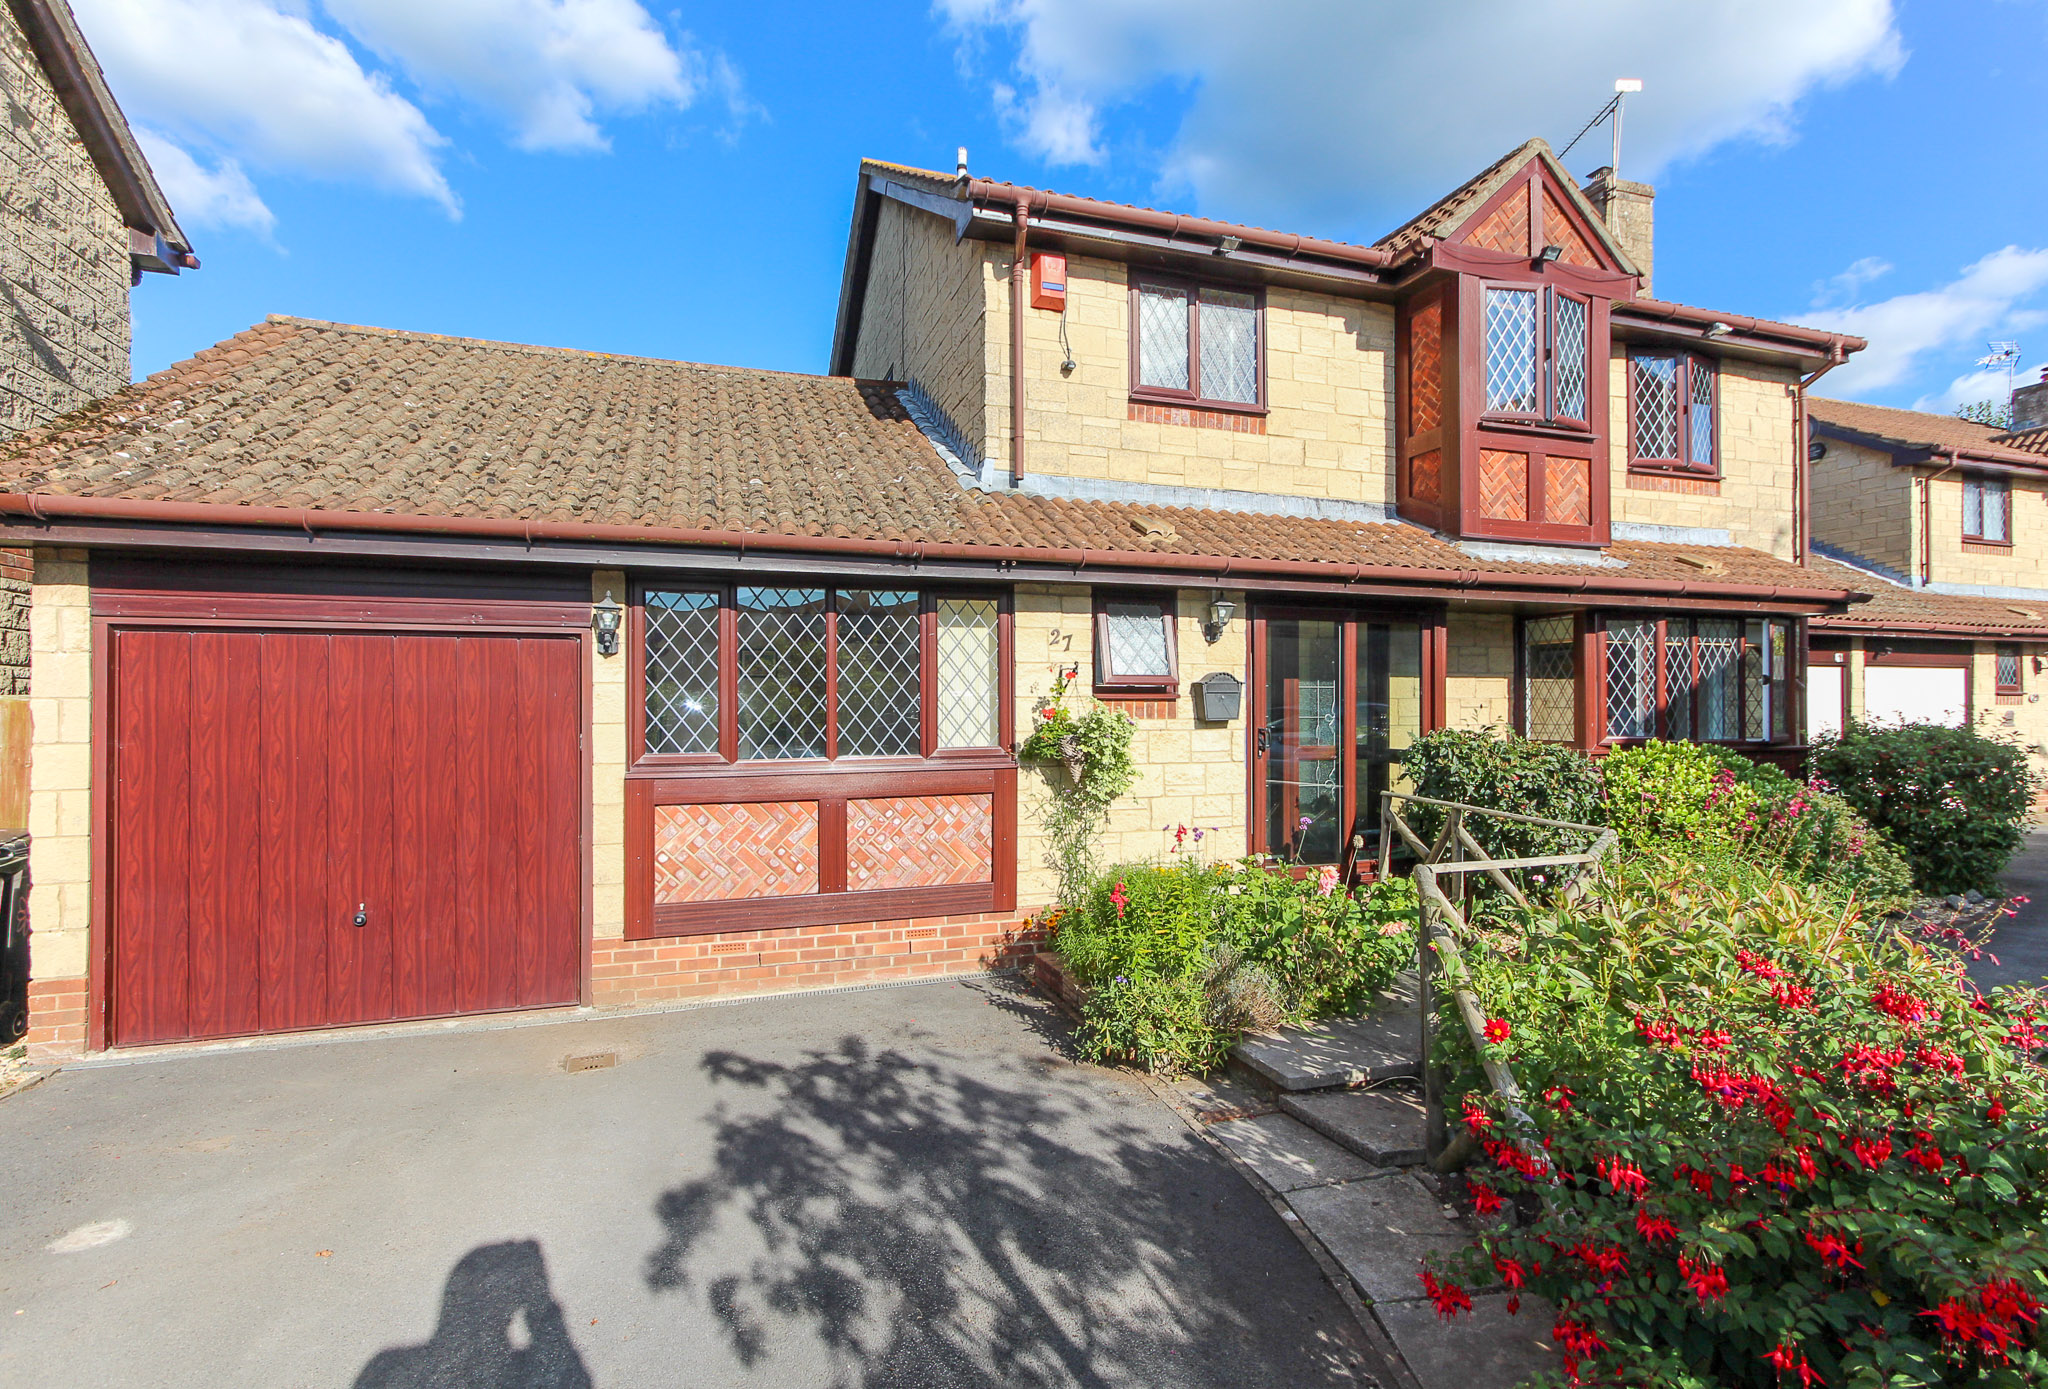 A 4 bedroom detached family house with garage in Langford